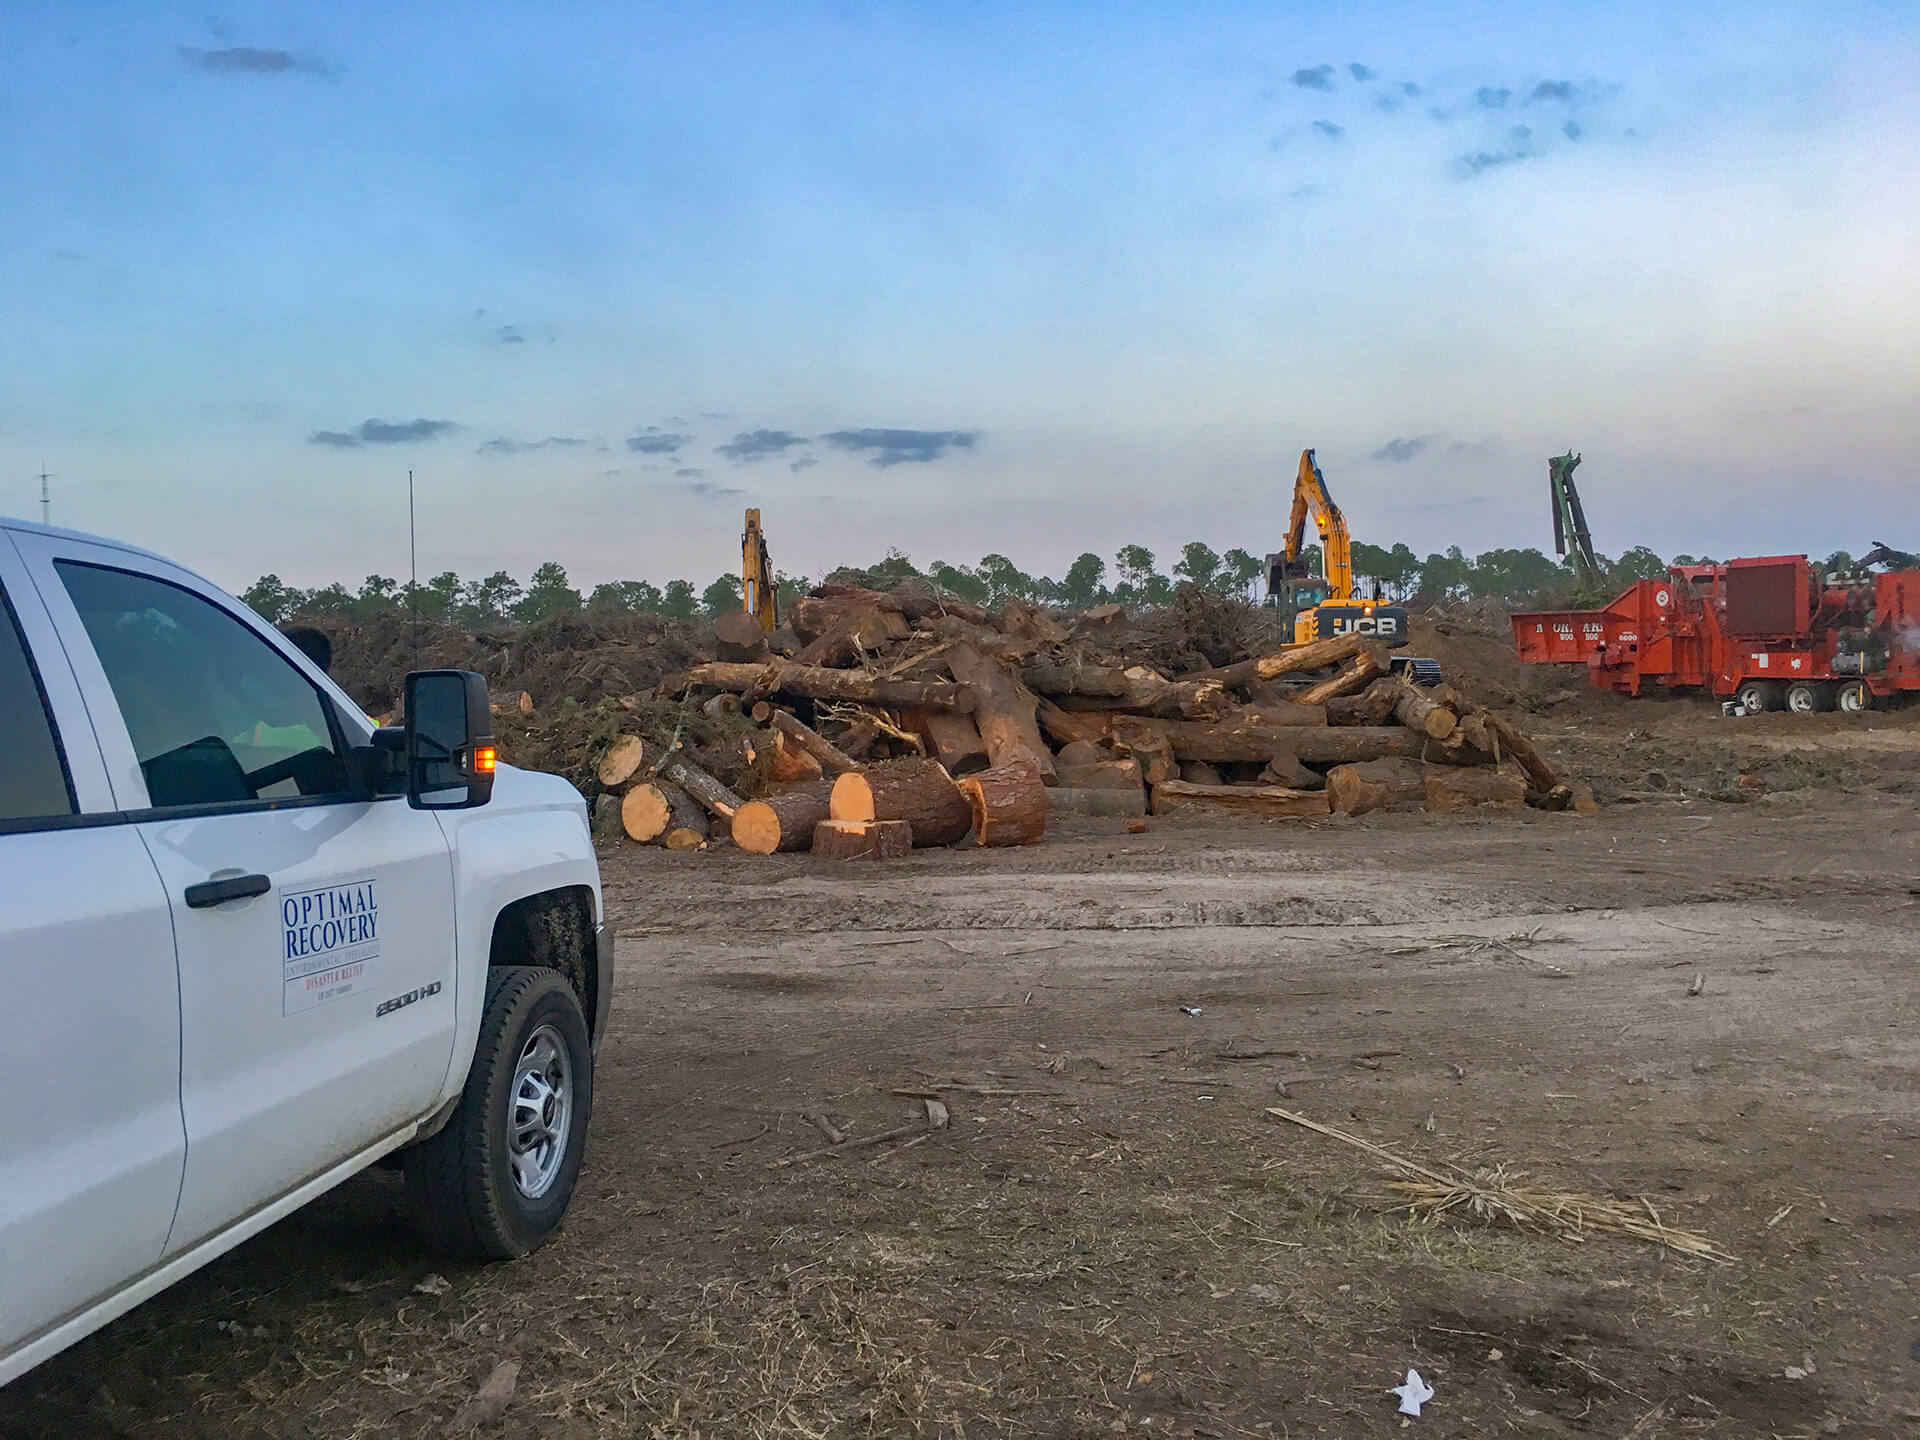 Optimal Recovery, Job site, Debris Cleanup, Storm, Hurricane